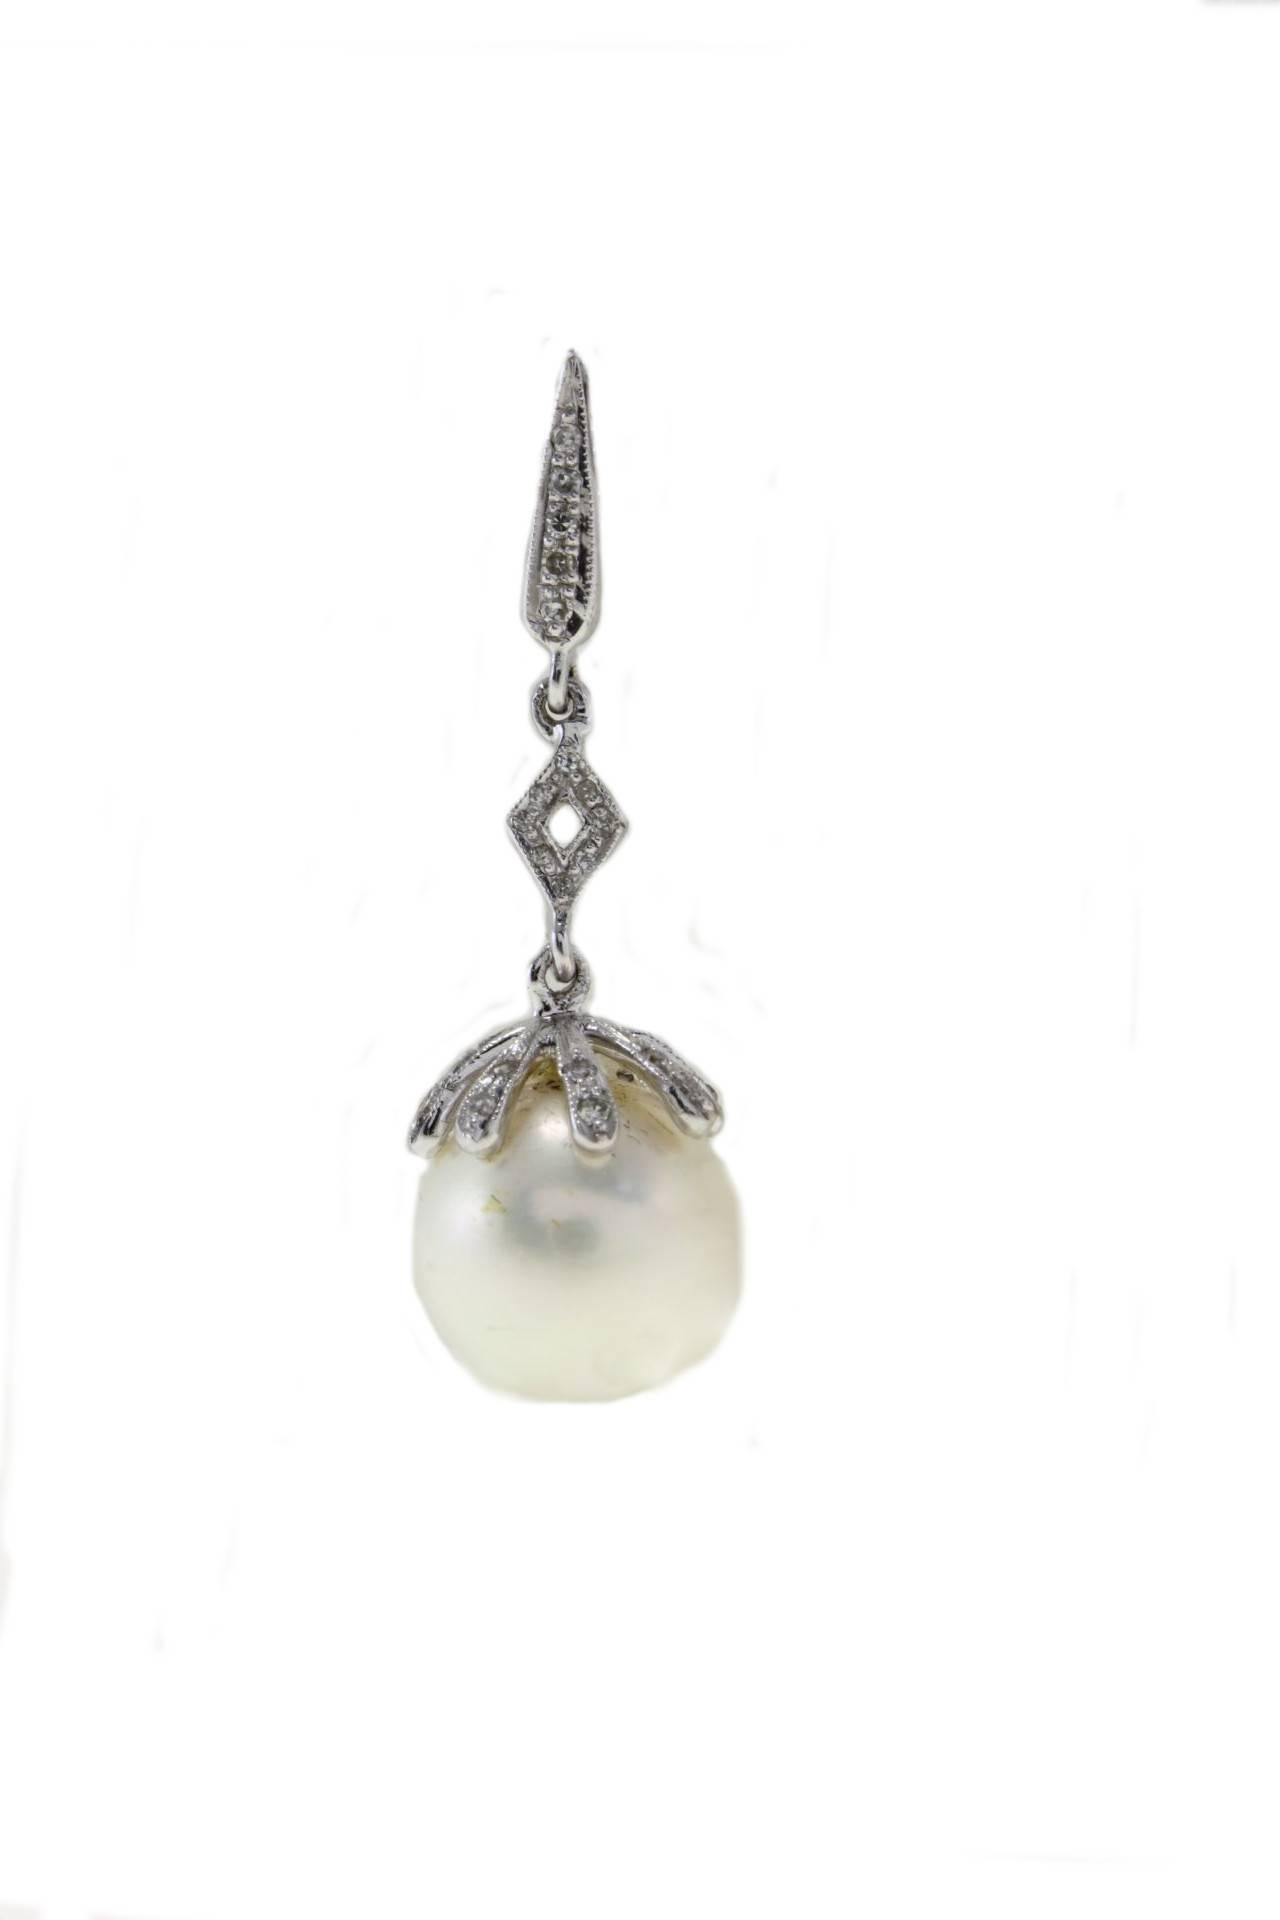 Delightful earrings in 14Kt white gold composed of one pearl each with a diameter between 9/10mm situated at the end of a diamonds chain.
pearls(3.70gr)   
diamonds(0.66Kt)
Tot weight 6.7 gr
R.f 516397

For any enquires, please contact the seller